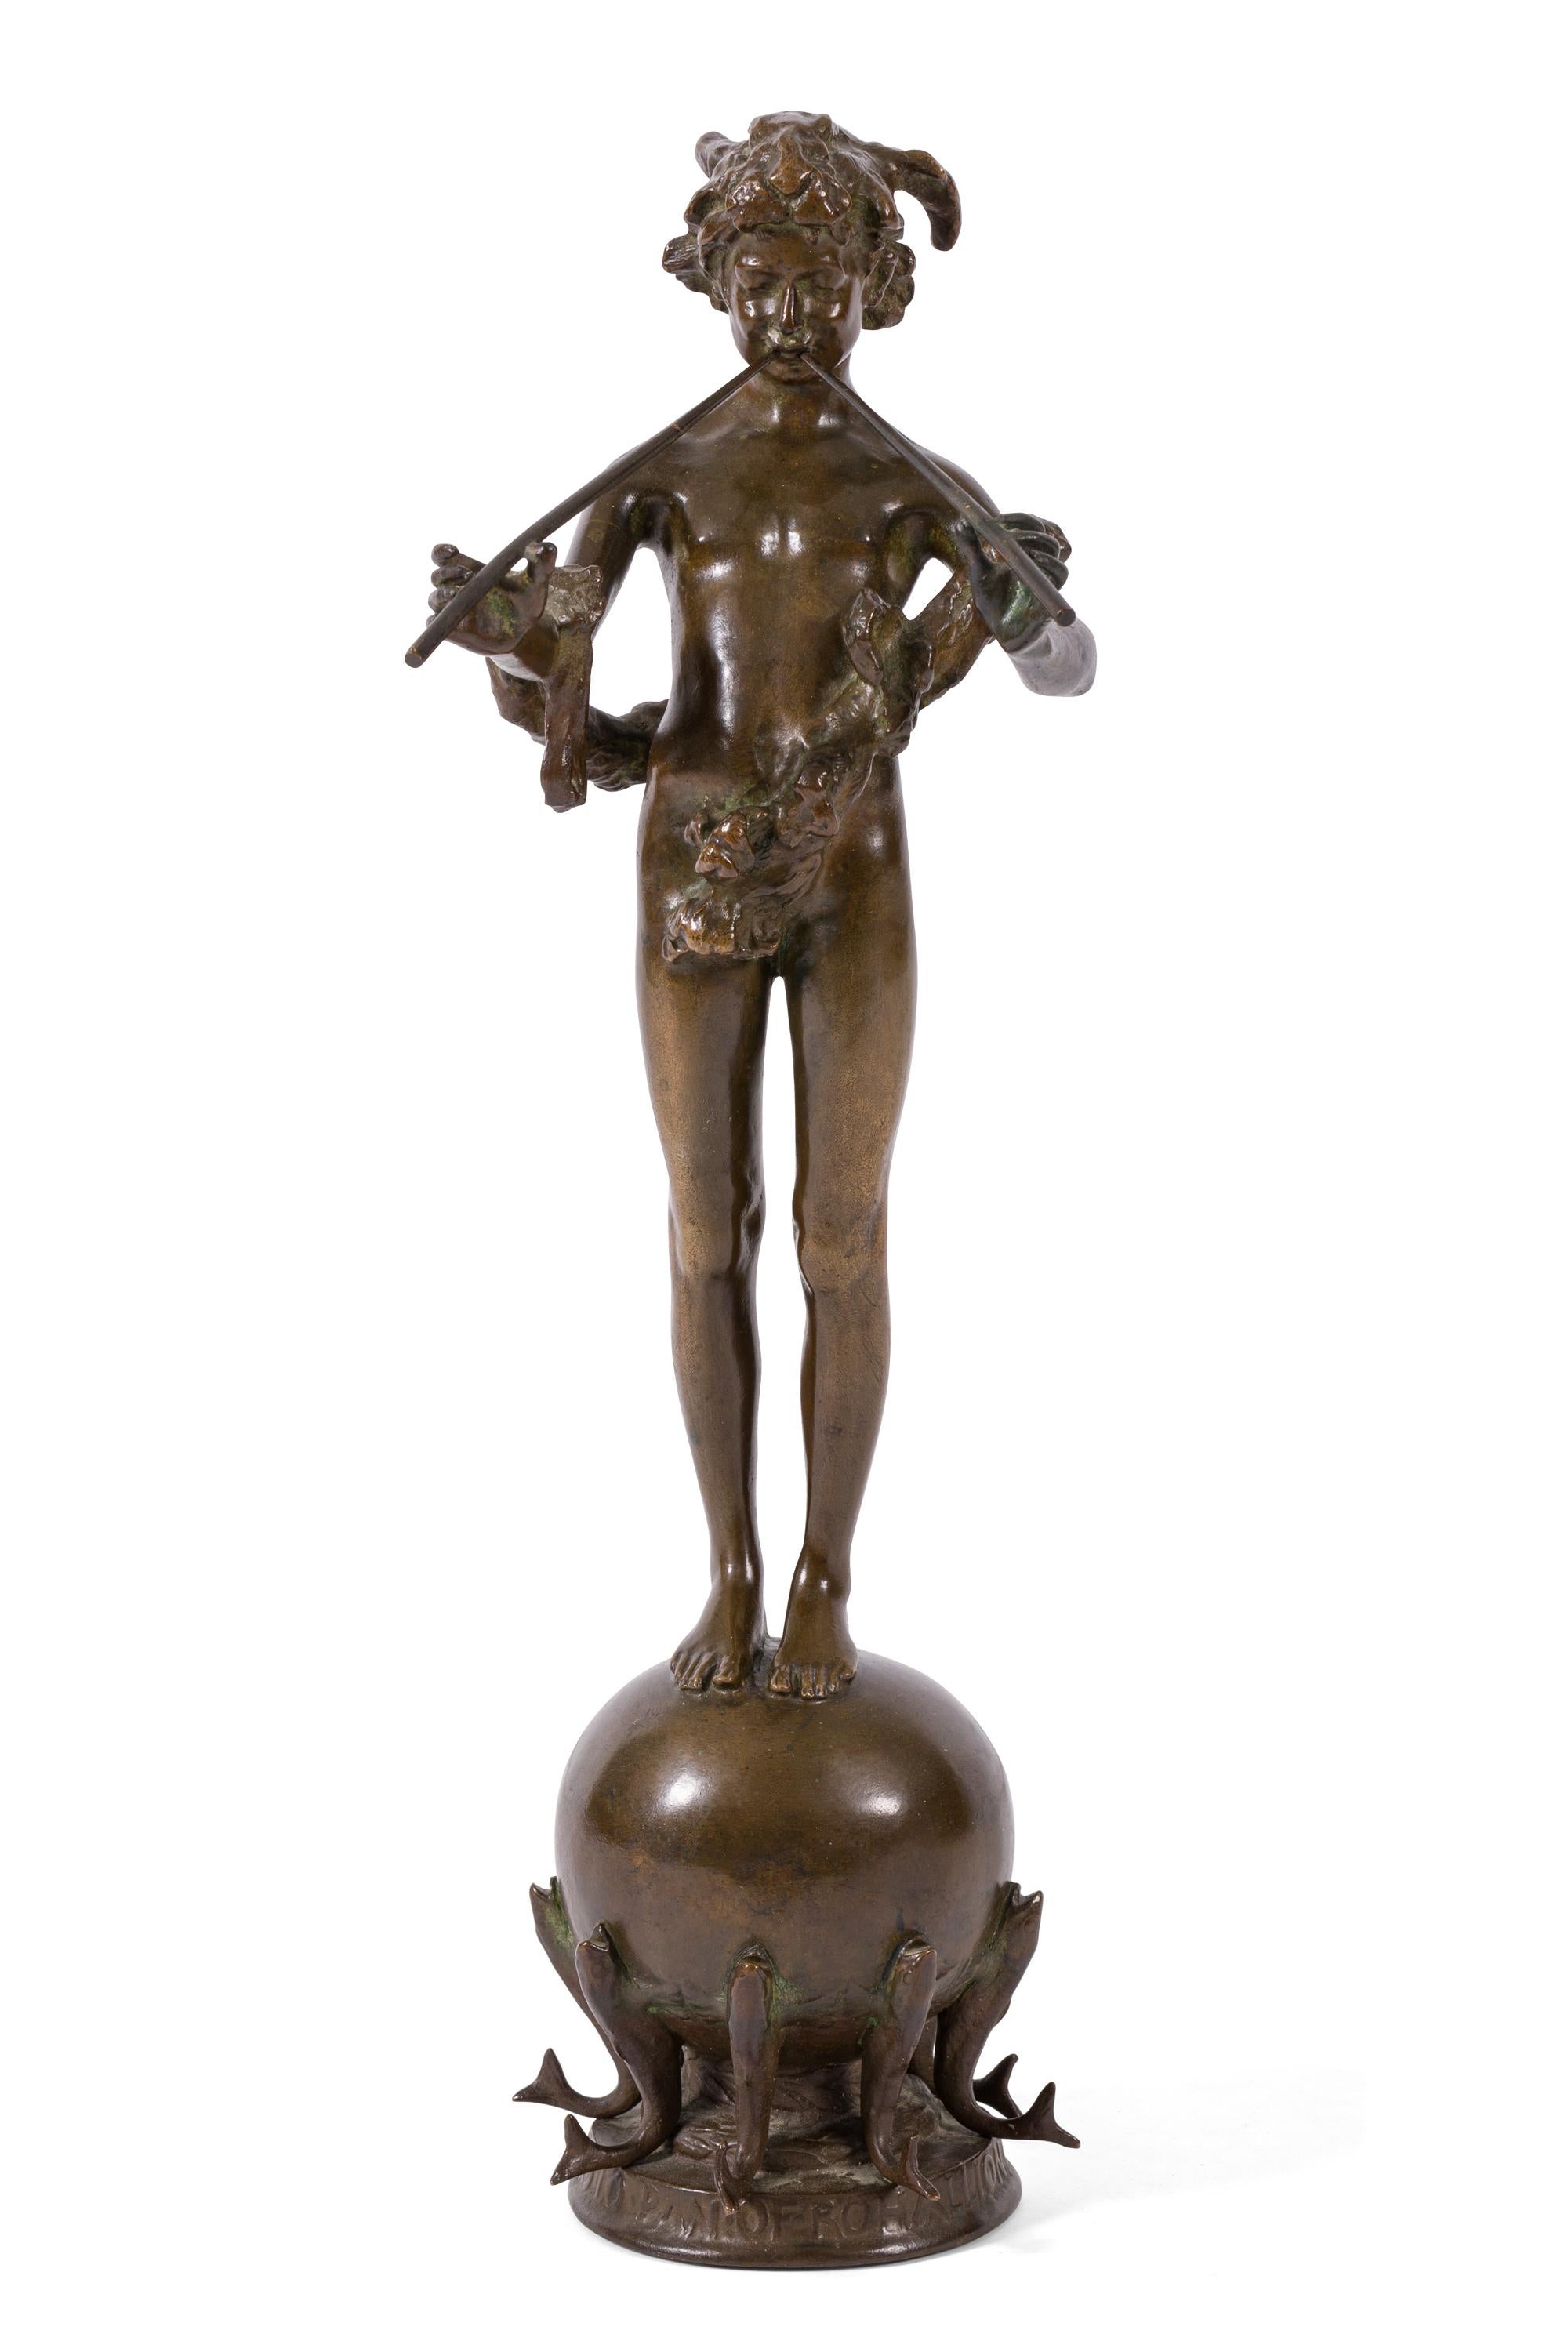 Frederick William MacMonnies (American, 1863-1937) Pan of Rohallion, conceived 1890 Bronze with brown patina. Inscribed on reverse: Frederick MacMonnies Stamped on reverse: H. Rouard. Fondeur PROVENANCE: Private collection, New Jersey, acquired